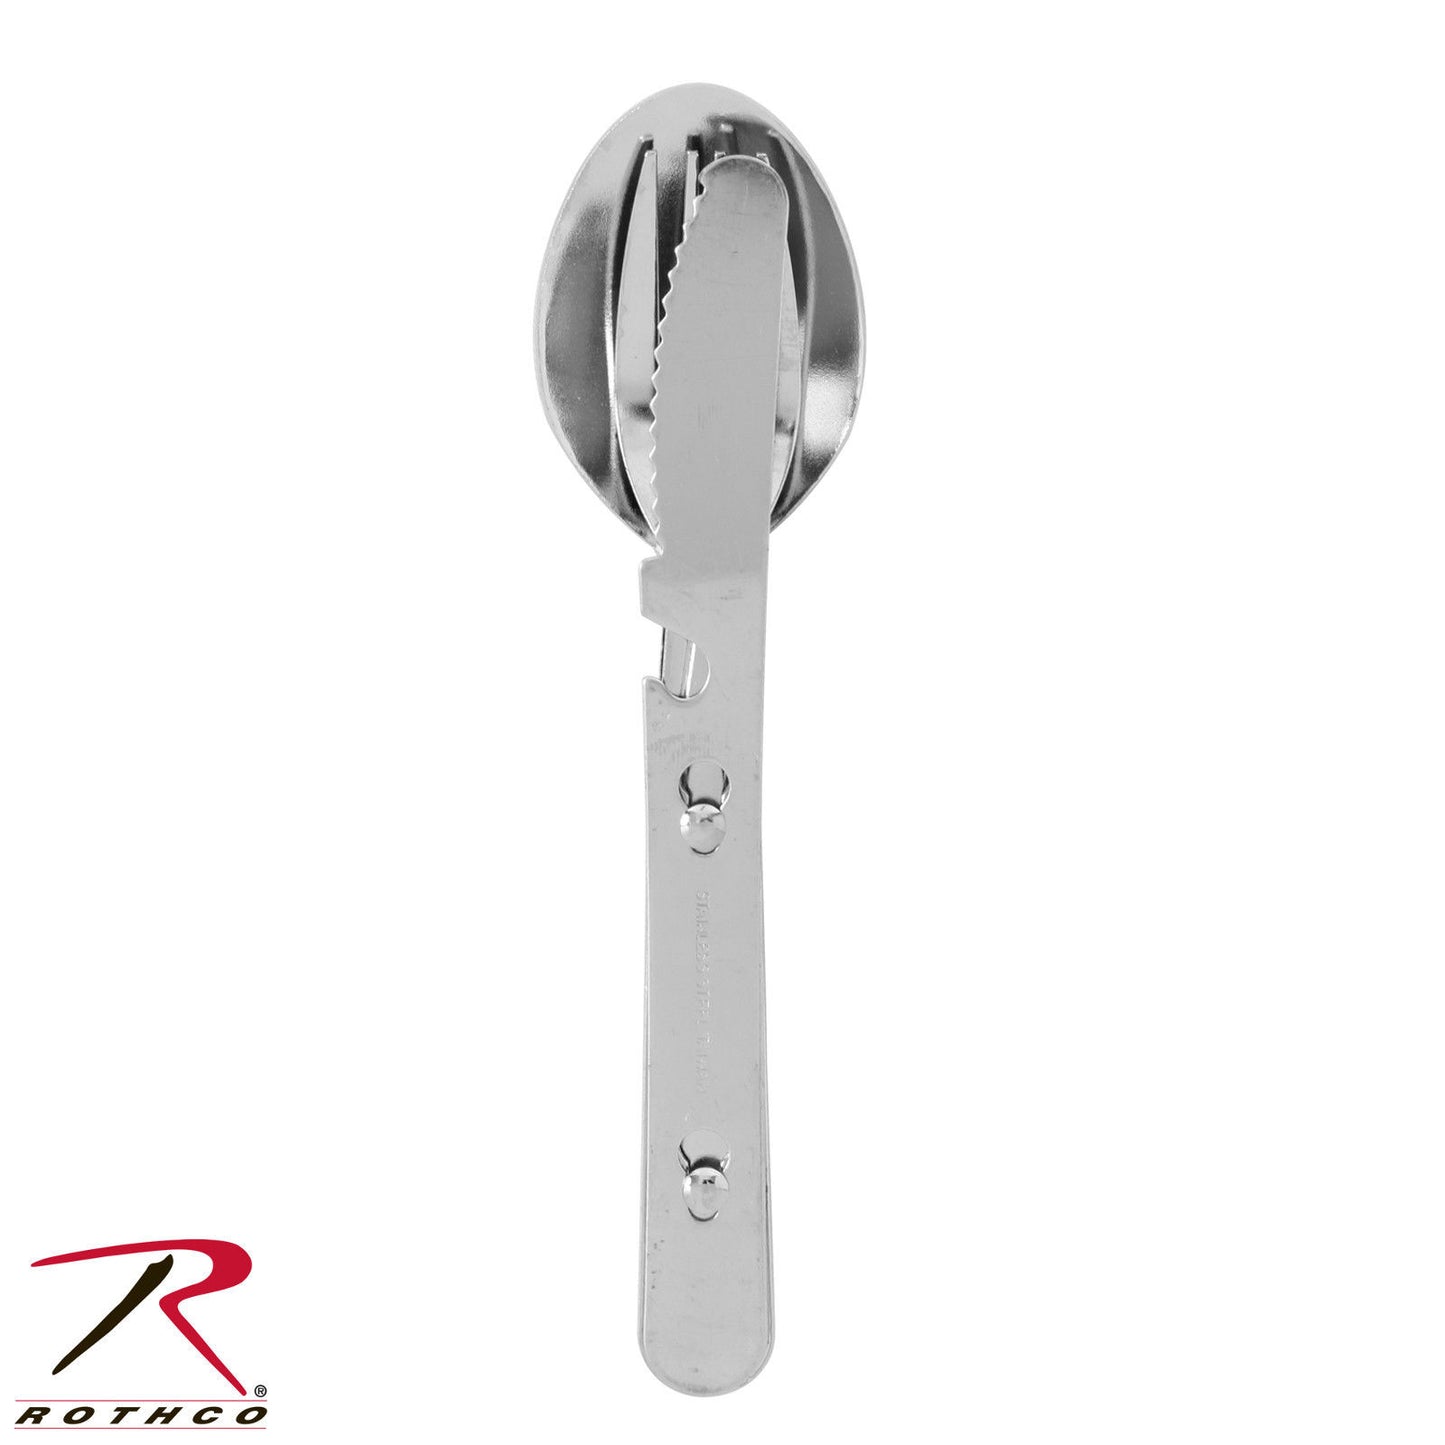 Rothco Chow Kit - 3 Piece Stainless Steel Knife, Fork & Spoon In A Locking Set